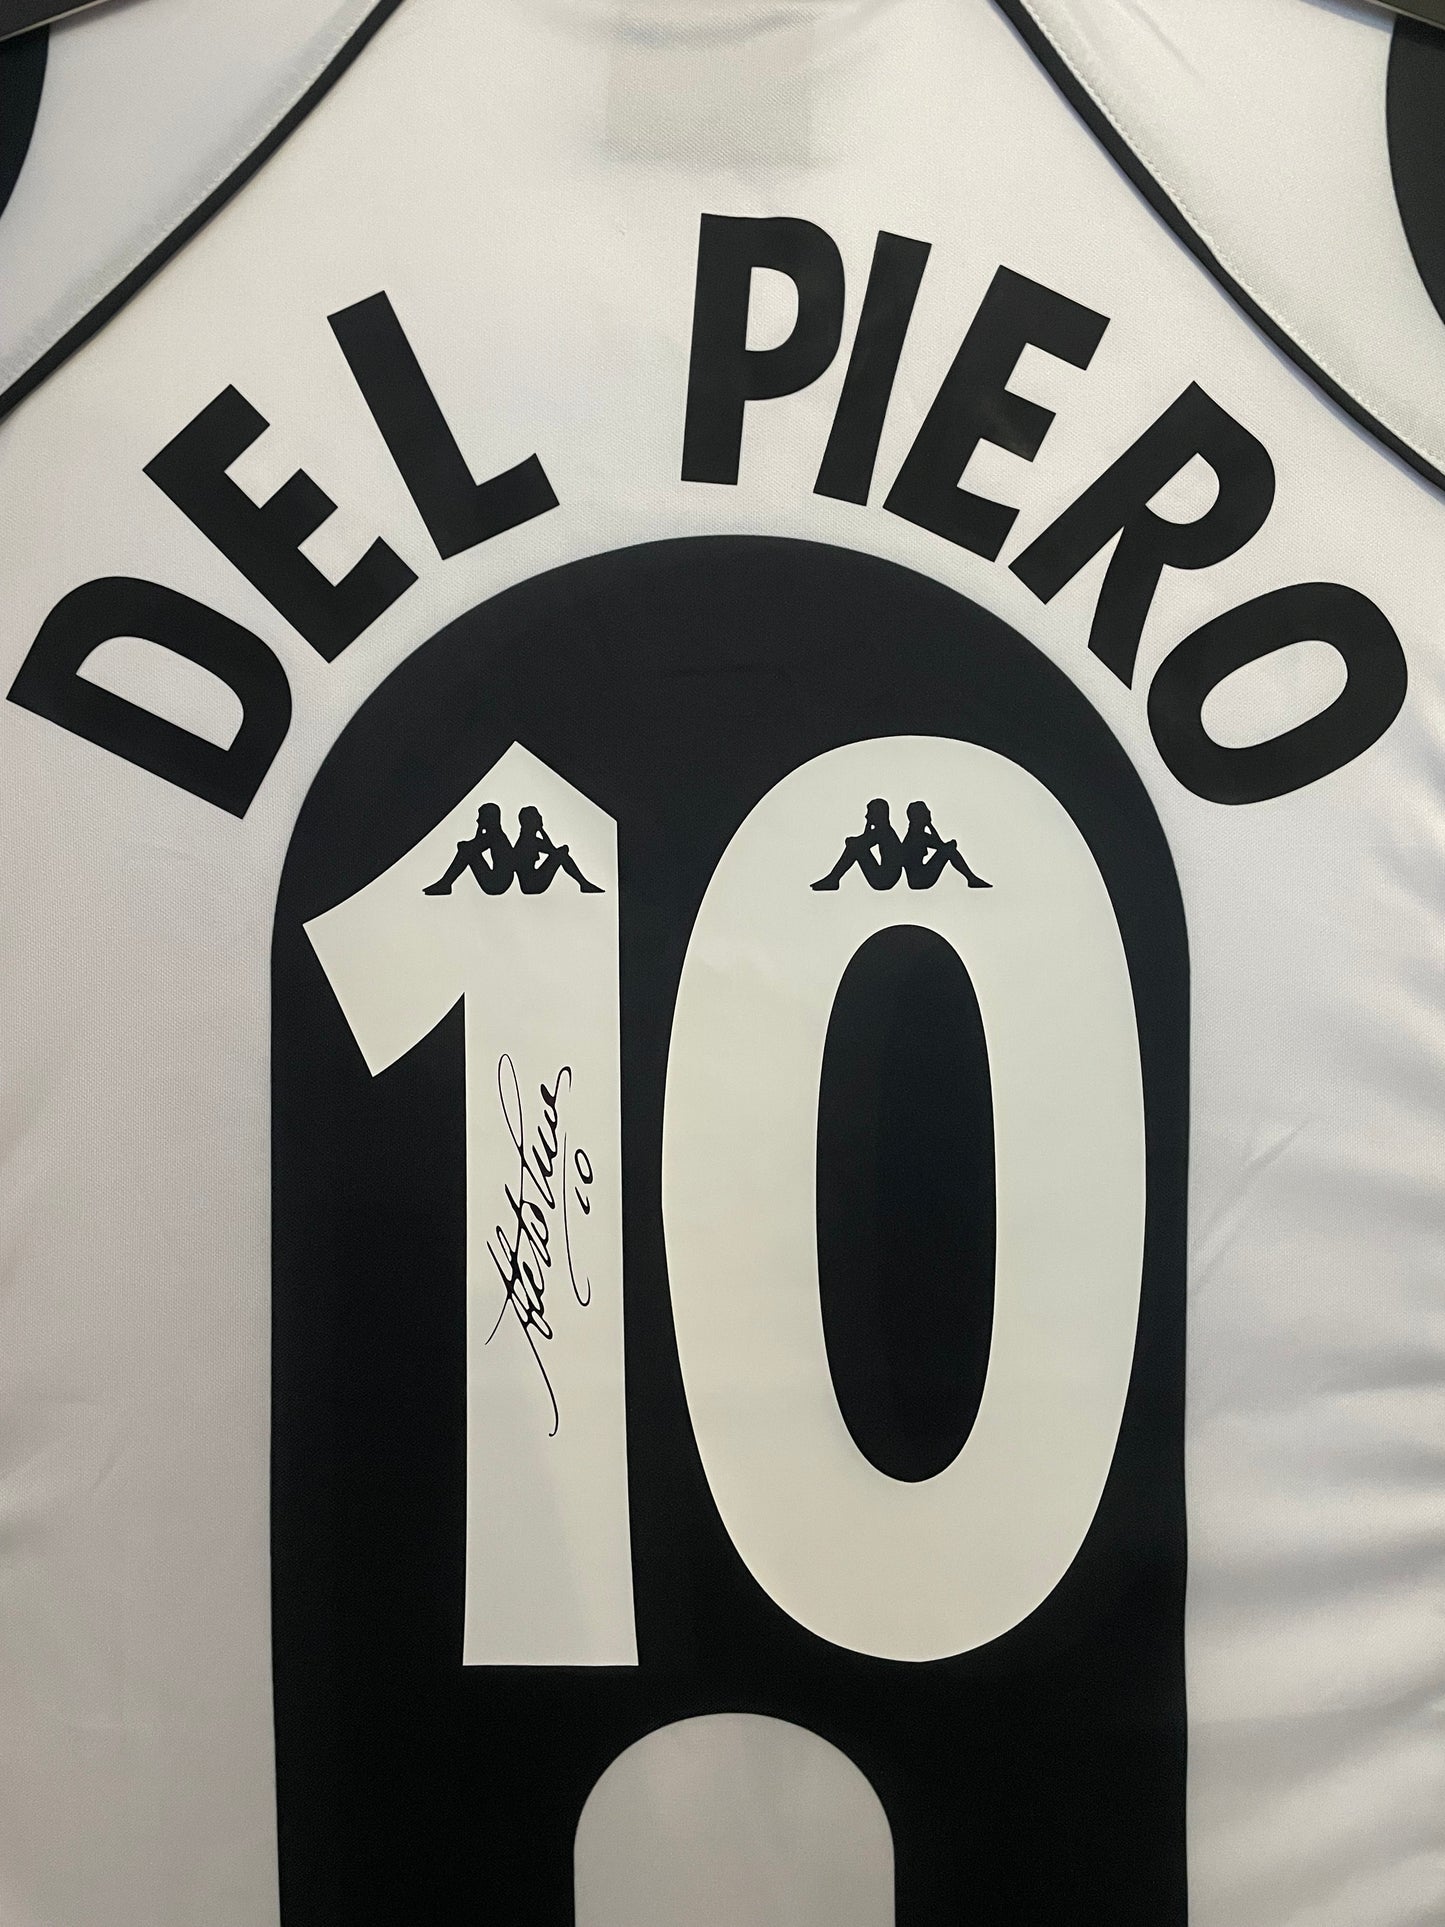 Alessandro Del Piero Juventus 1997/98 Signed Framed Home Shirt with COA